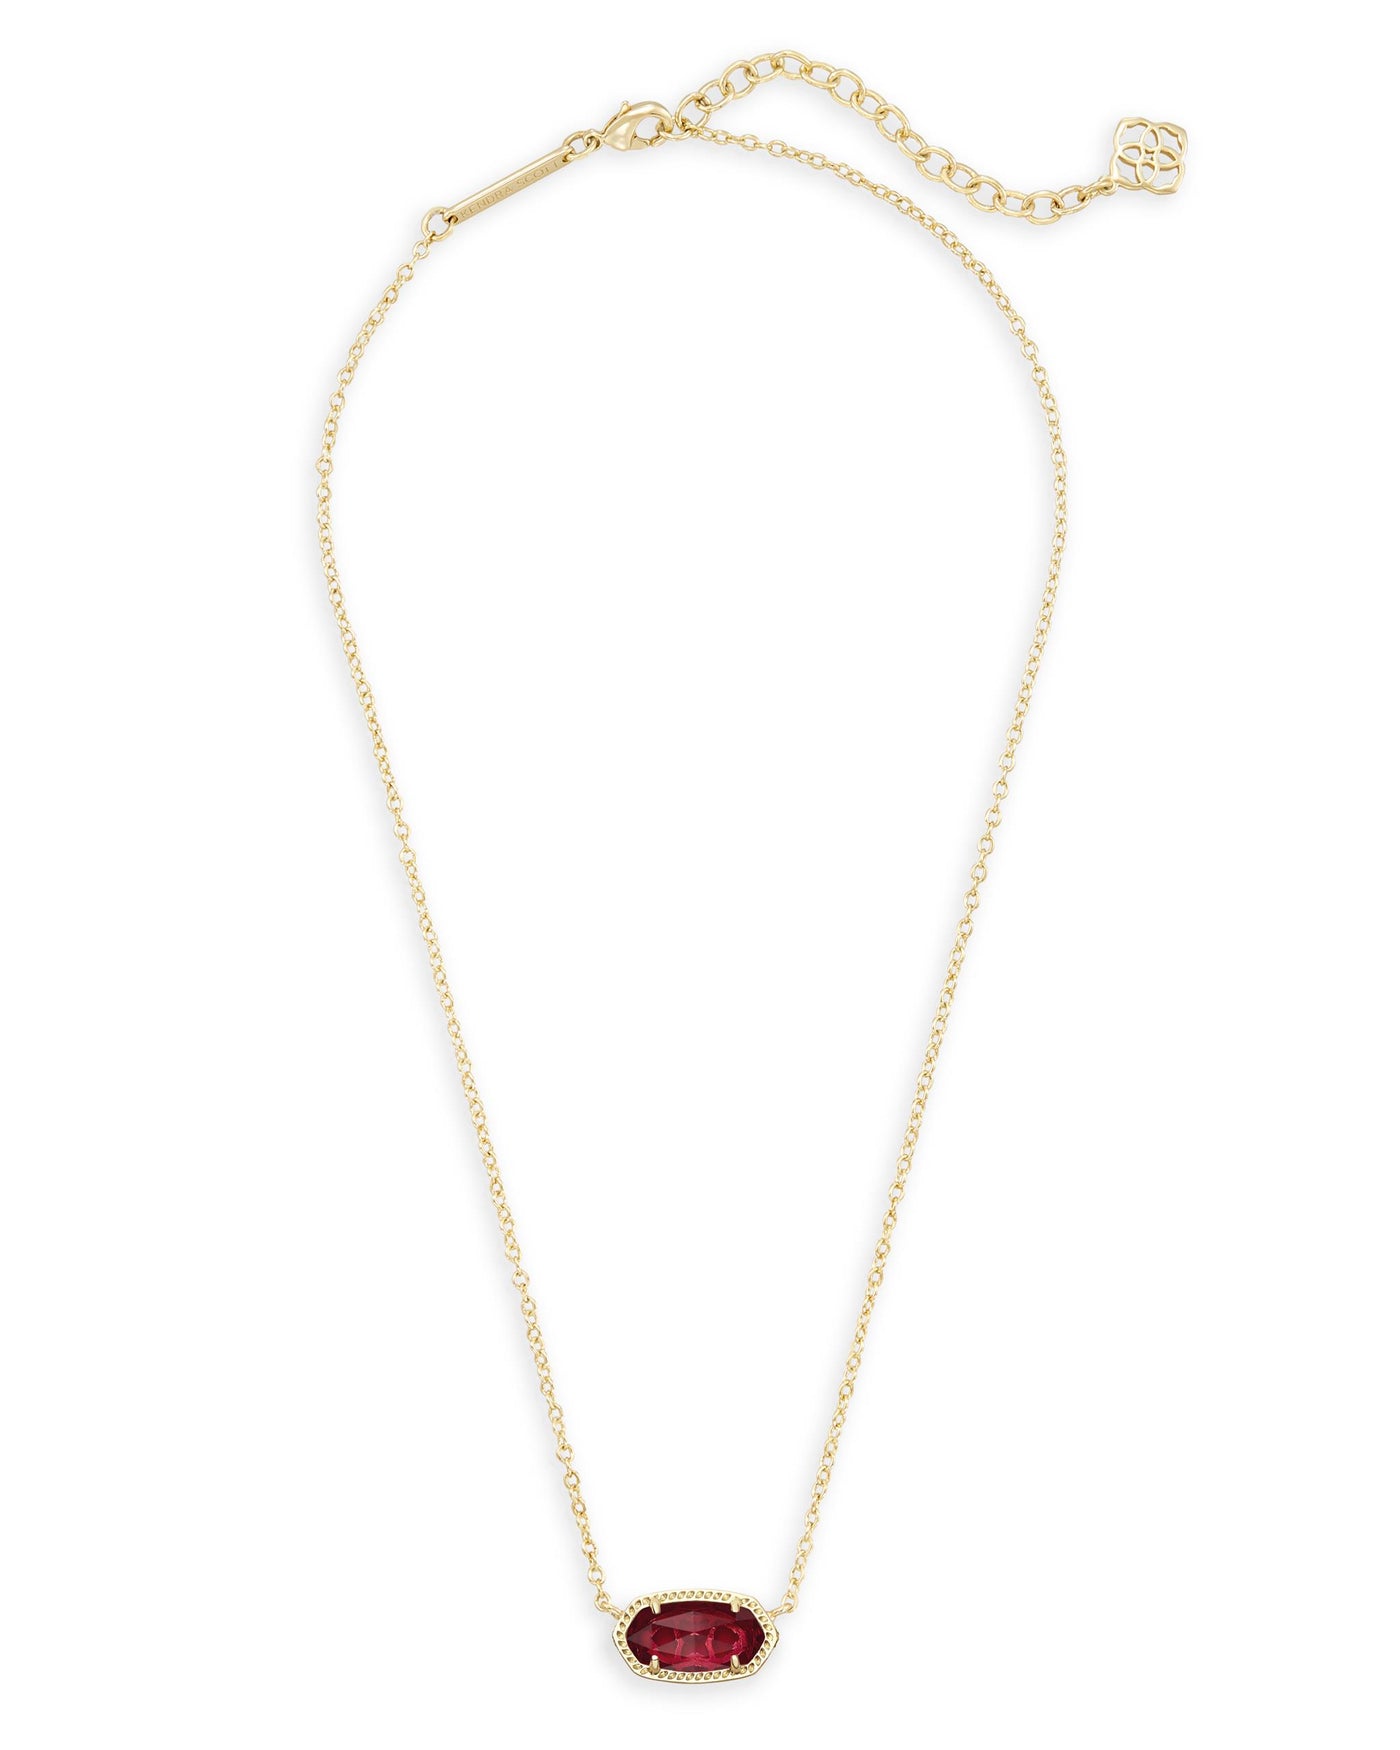 Gold Tone Necklace Featuring Berry Dichroic Glass by Kendra Scott